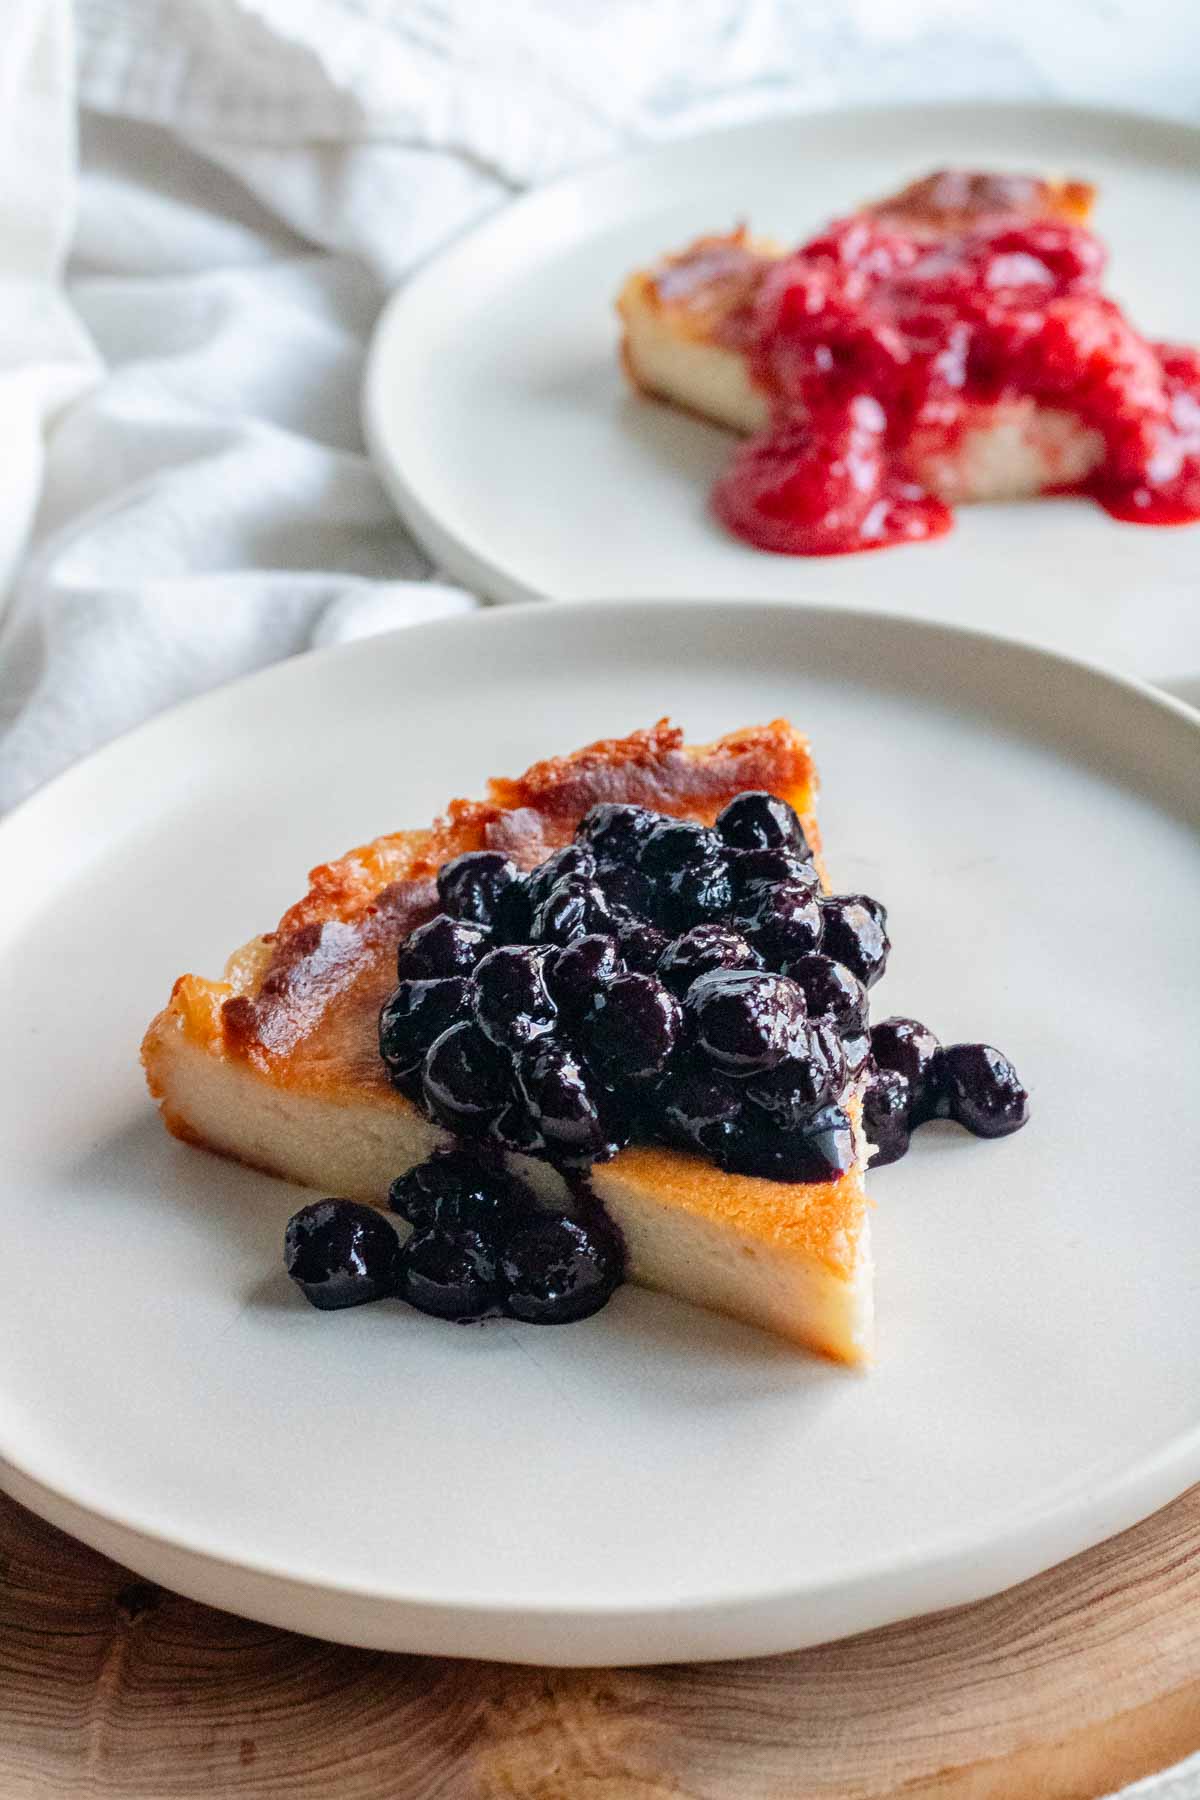 Two vegan cheesecake slices with blueberry sauce and strawberry sauce.